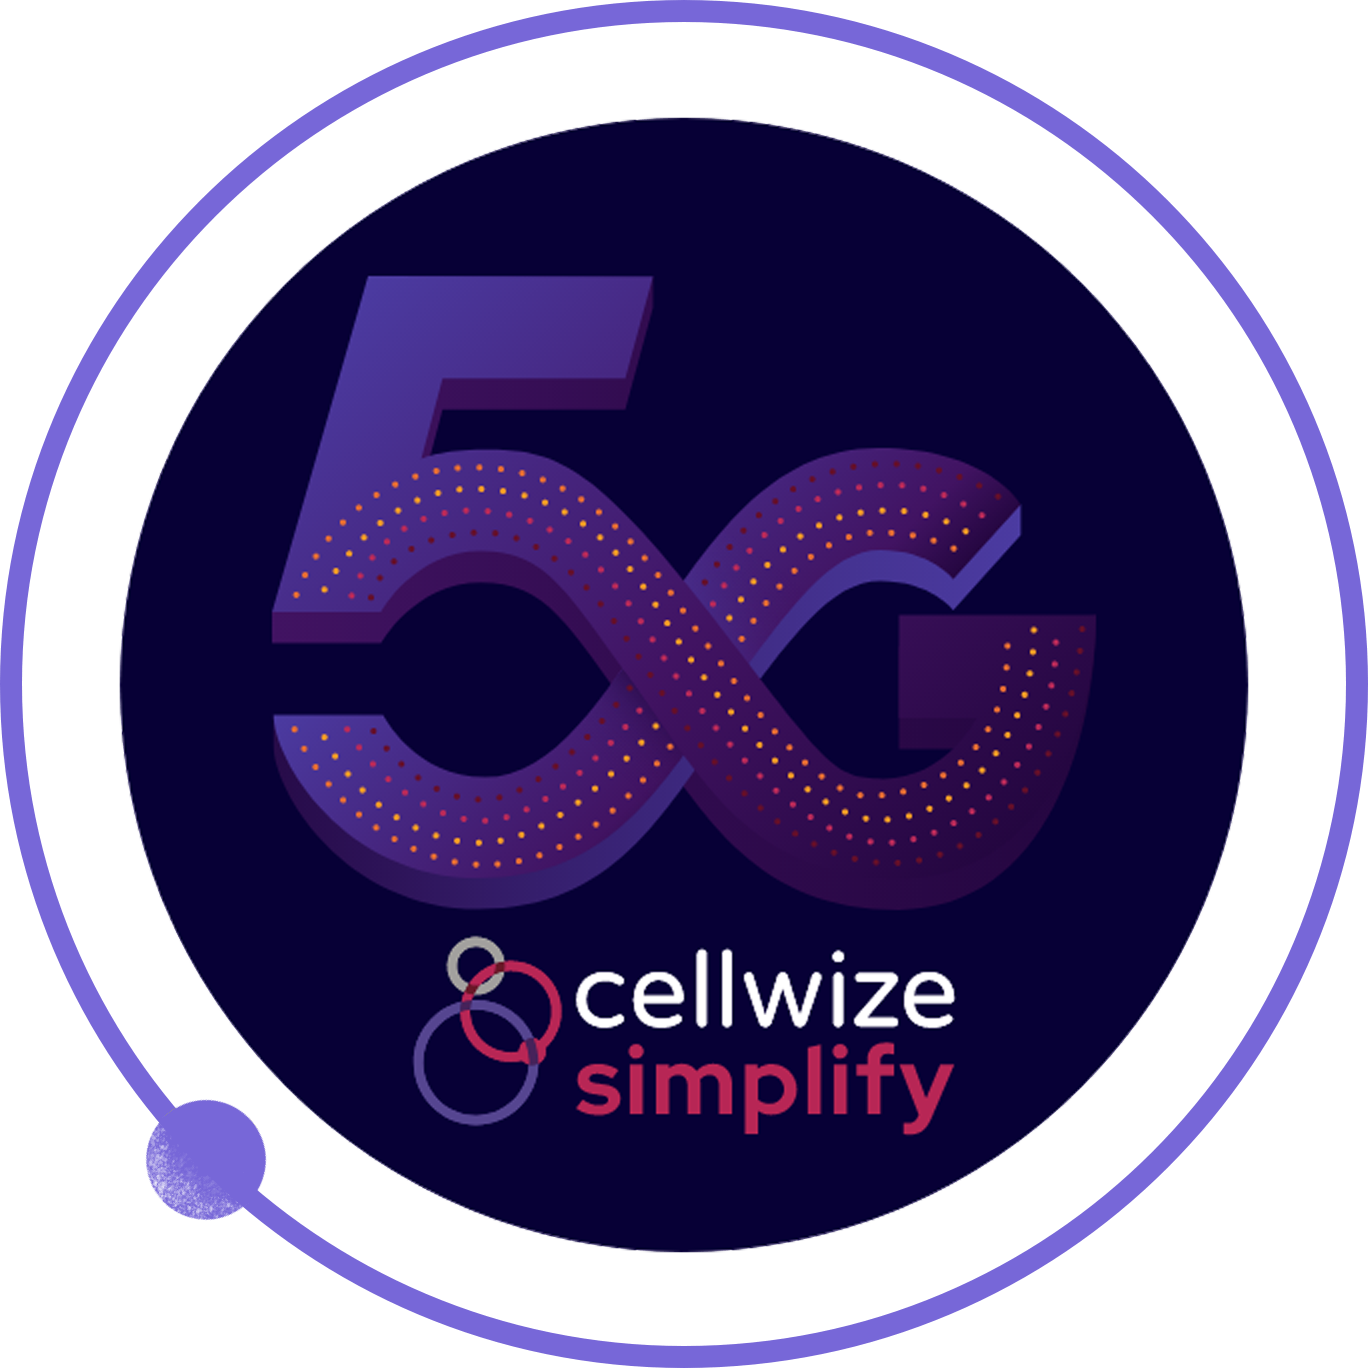 1368x1368_Cellwize_Simplify_5G_Infinity_circle.png